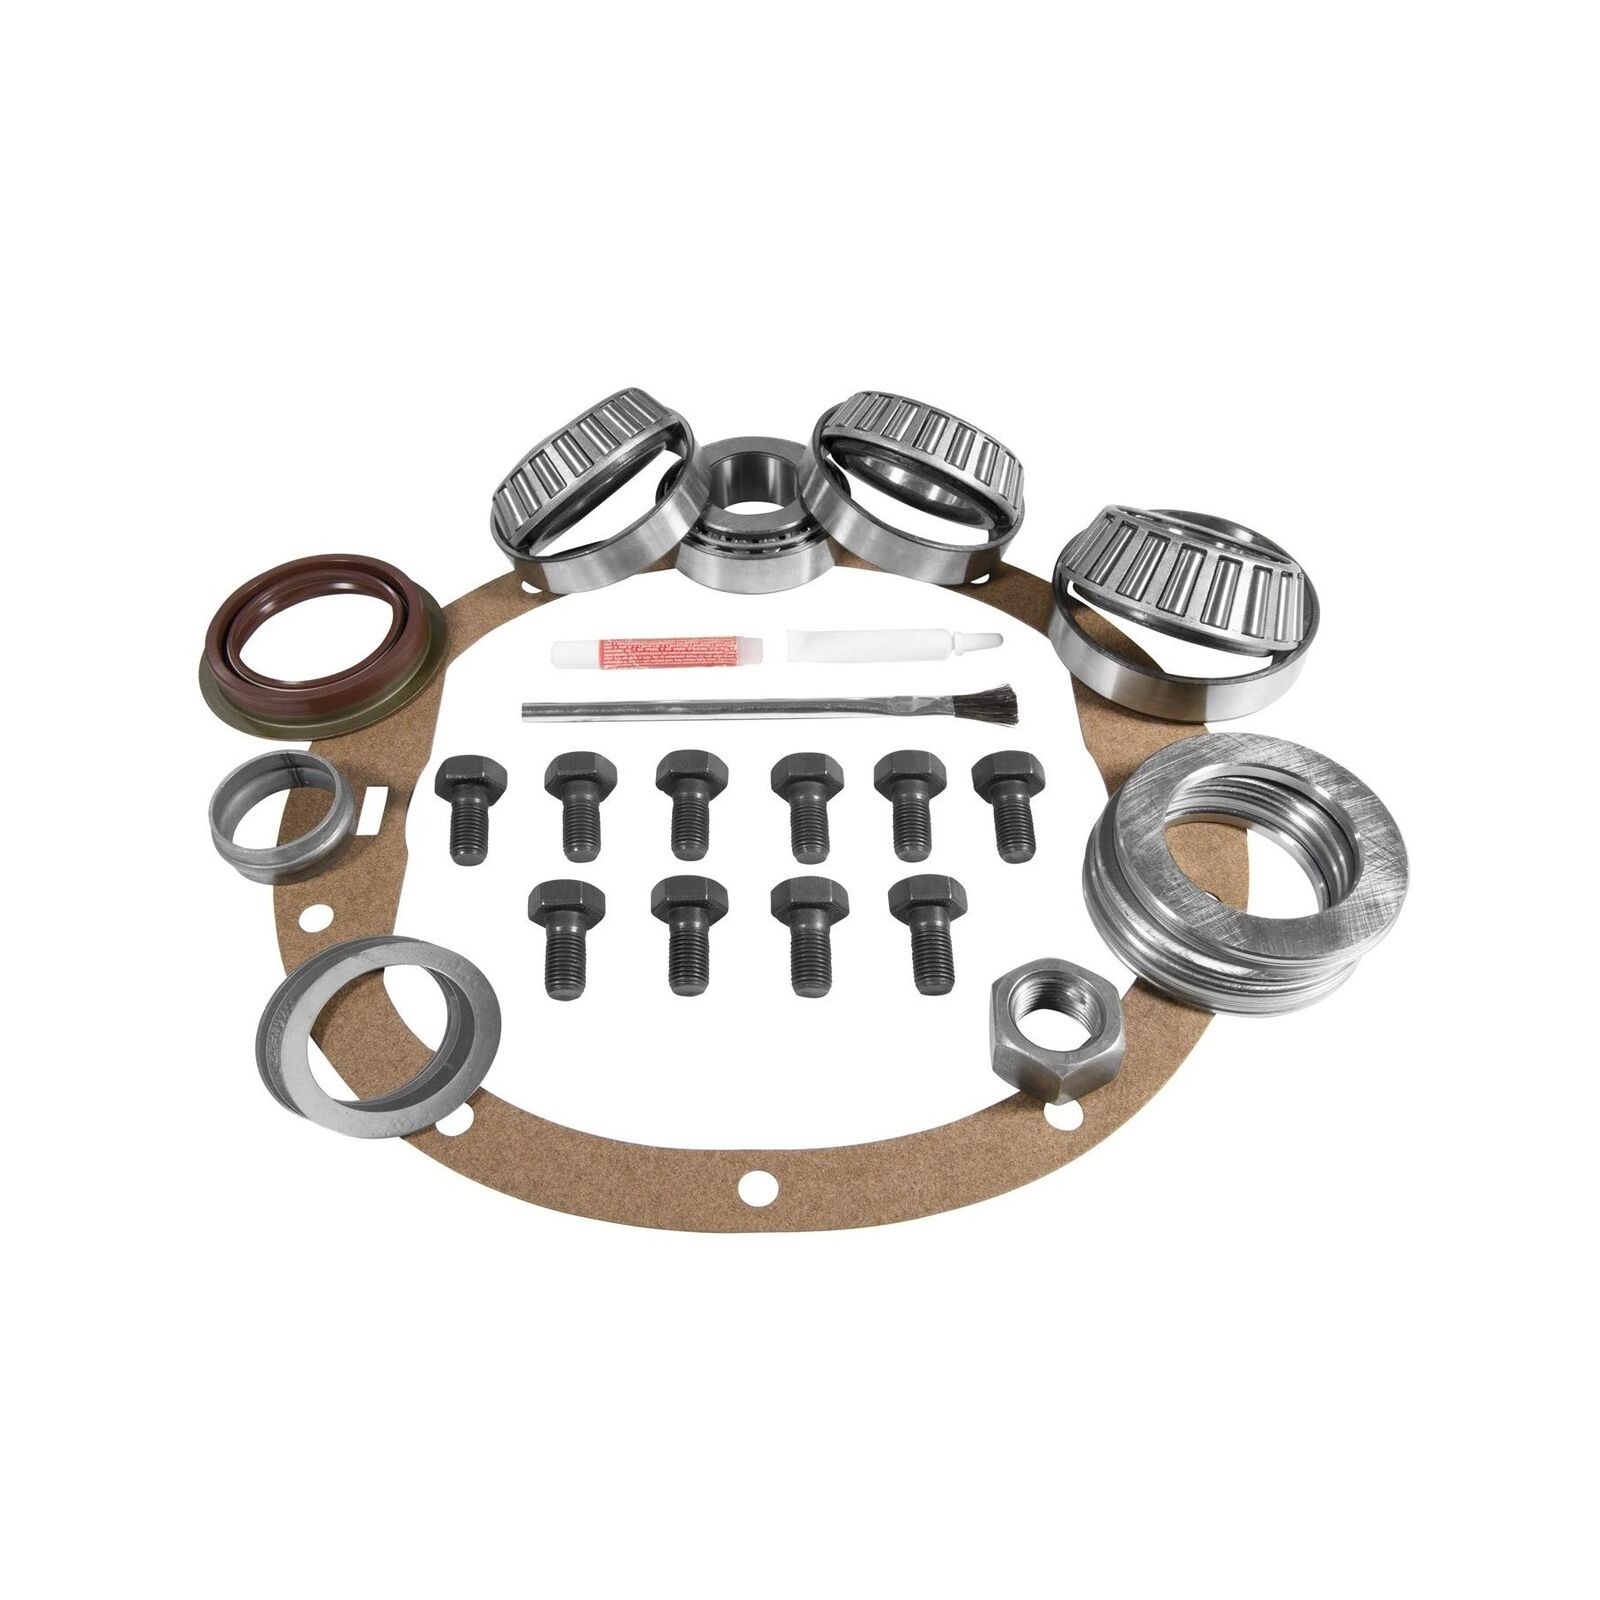 USA Standard Gear (ZK GM8.6) Master Overhaul Kit for GM 8.6 Differential